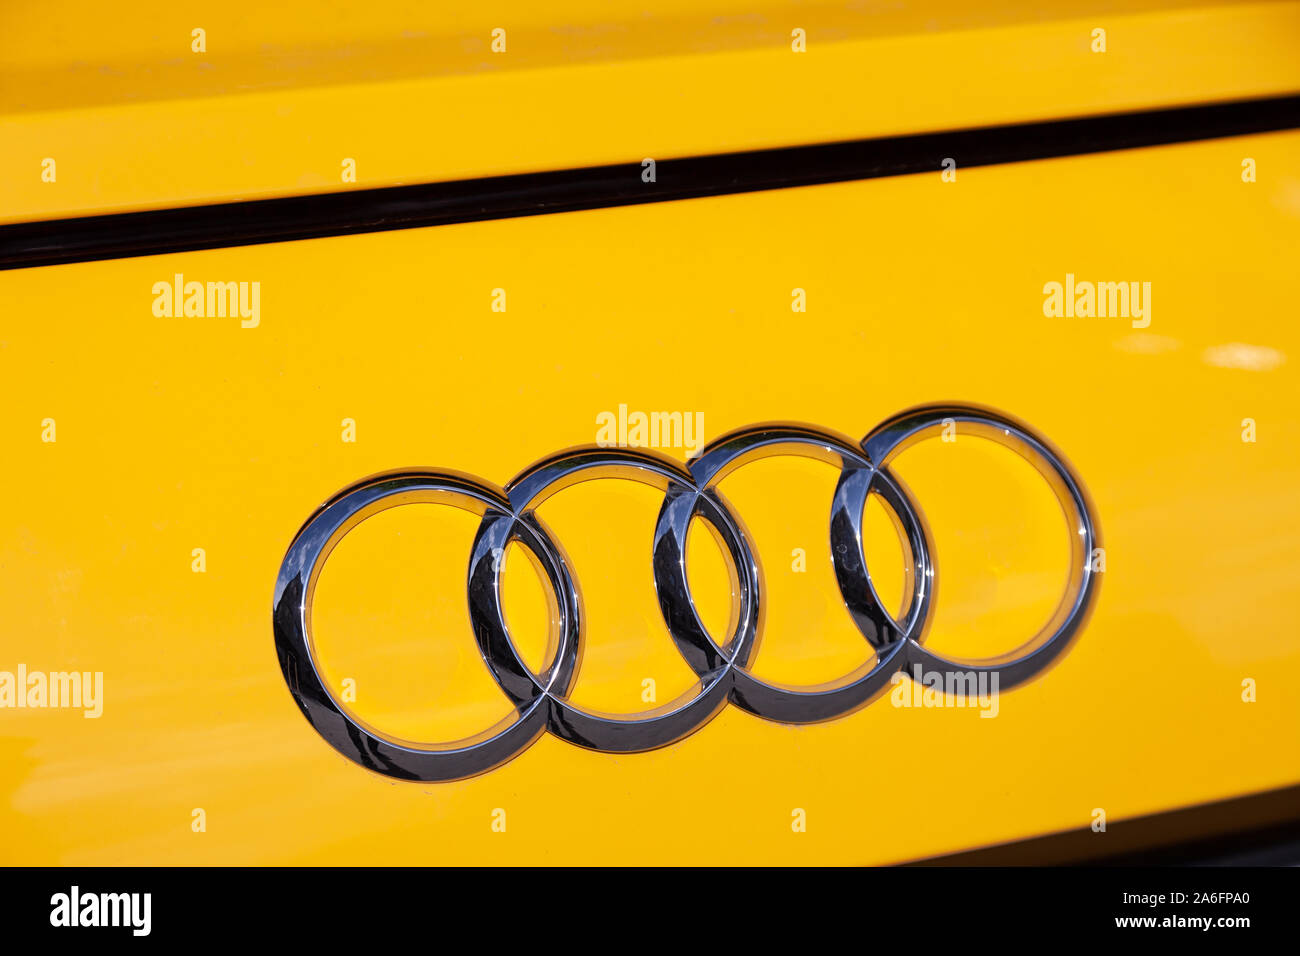 Russia Moscow 2019-06-17 The emblem on the back of a Audi TT S Line brand  logo on yellow car Stock Photo - Alamy